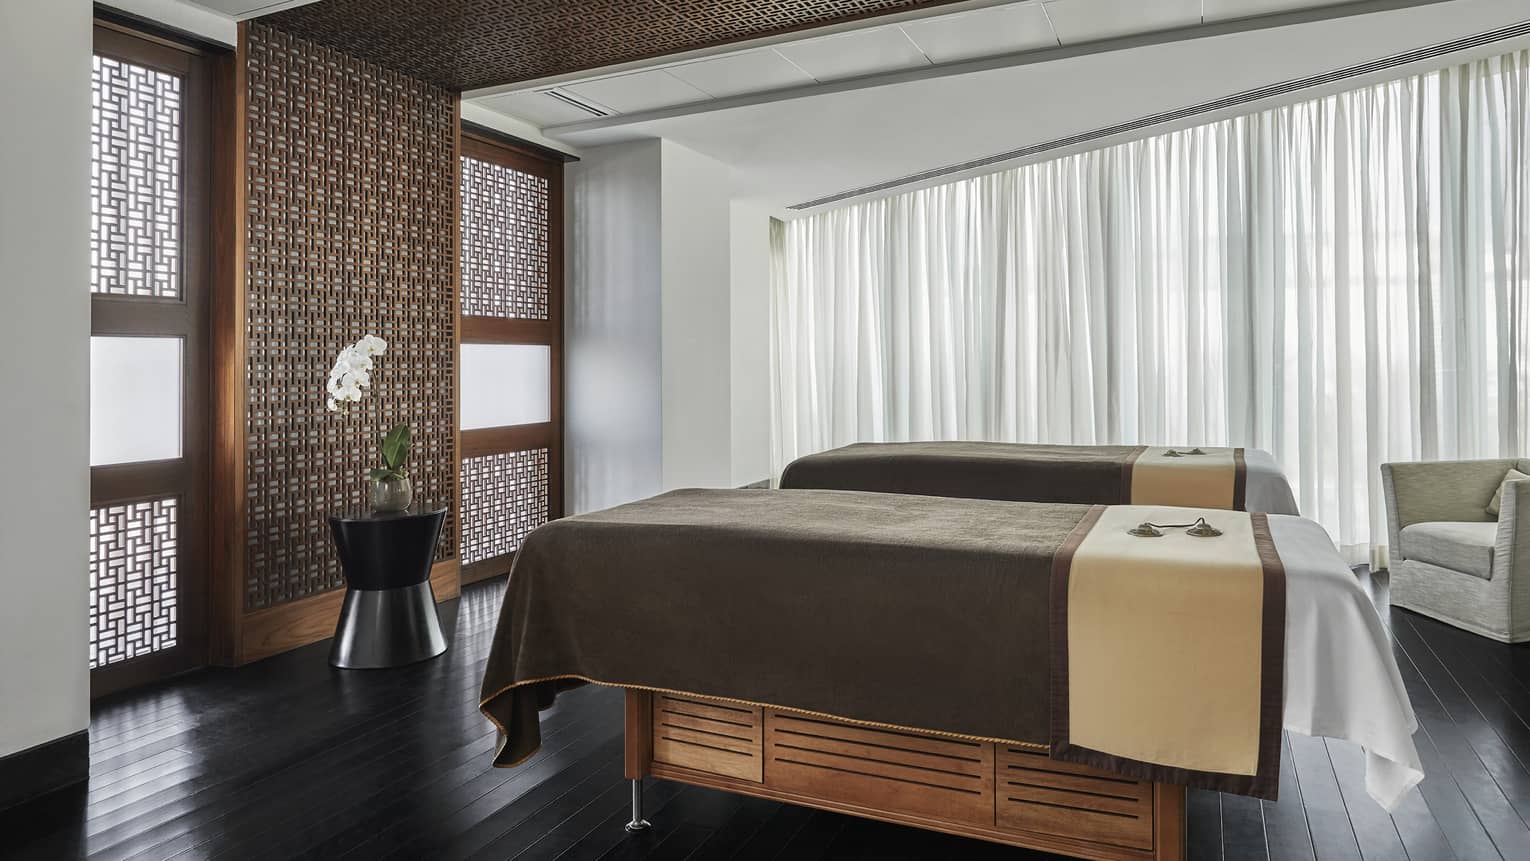 Pearl Spa side by side couples massage beds in treatment room with wood accent walls